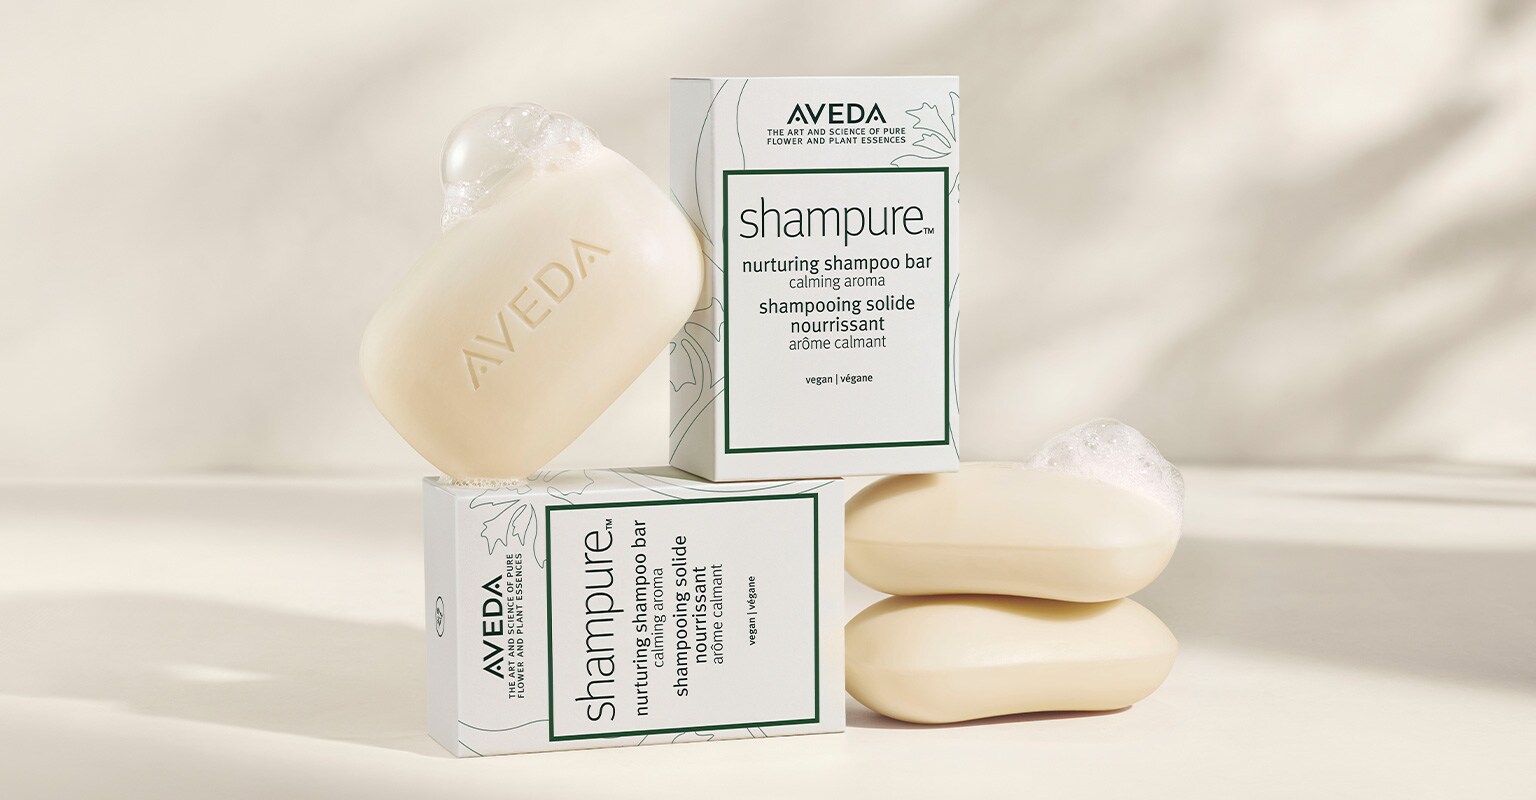 limited-edition shampure shampoo bar gently cleanses hair and is silicone free, sulfate cleanser free and 100% vegan.